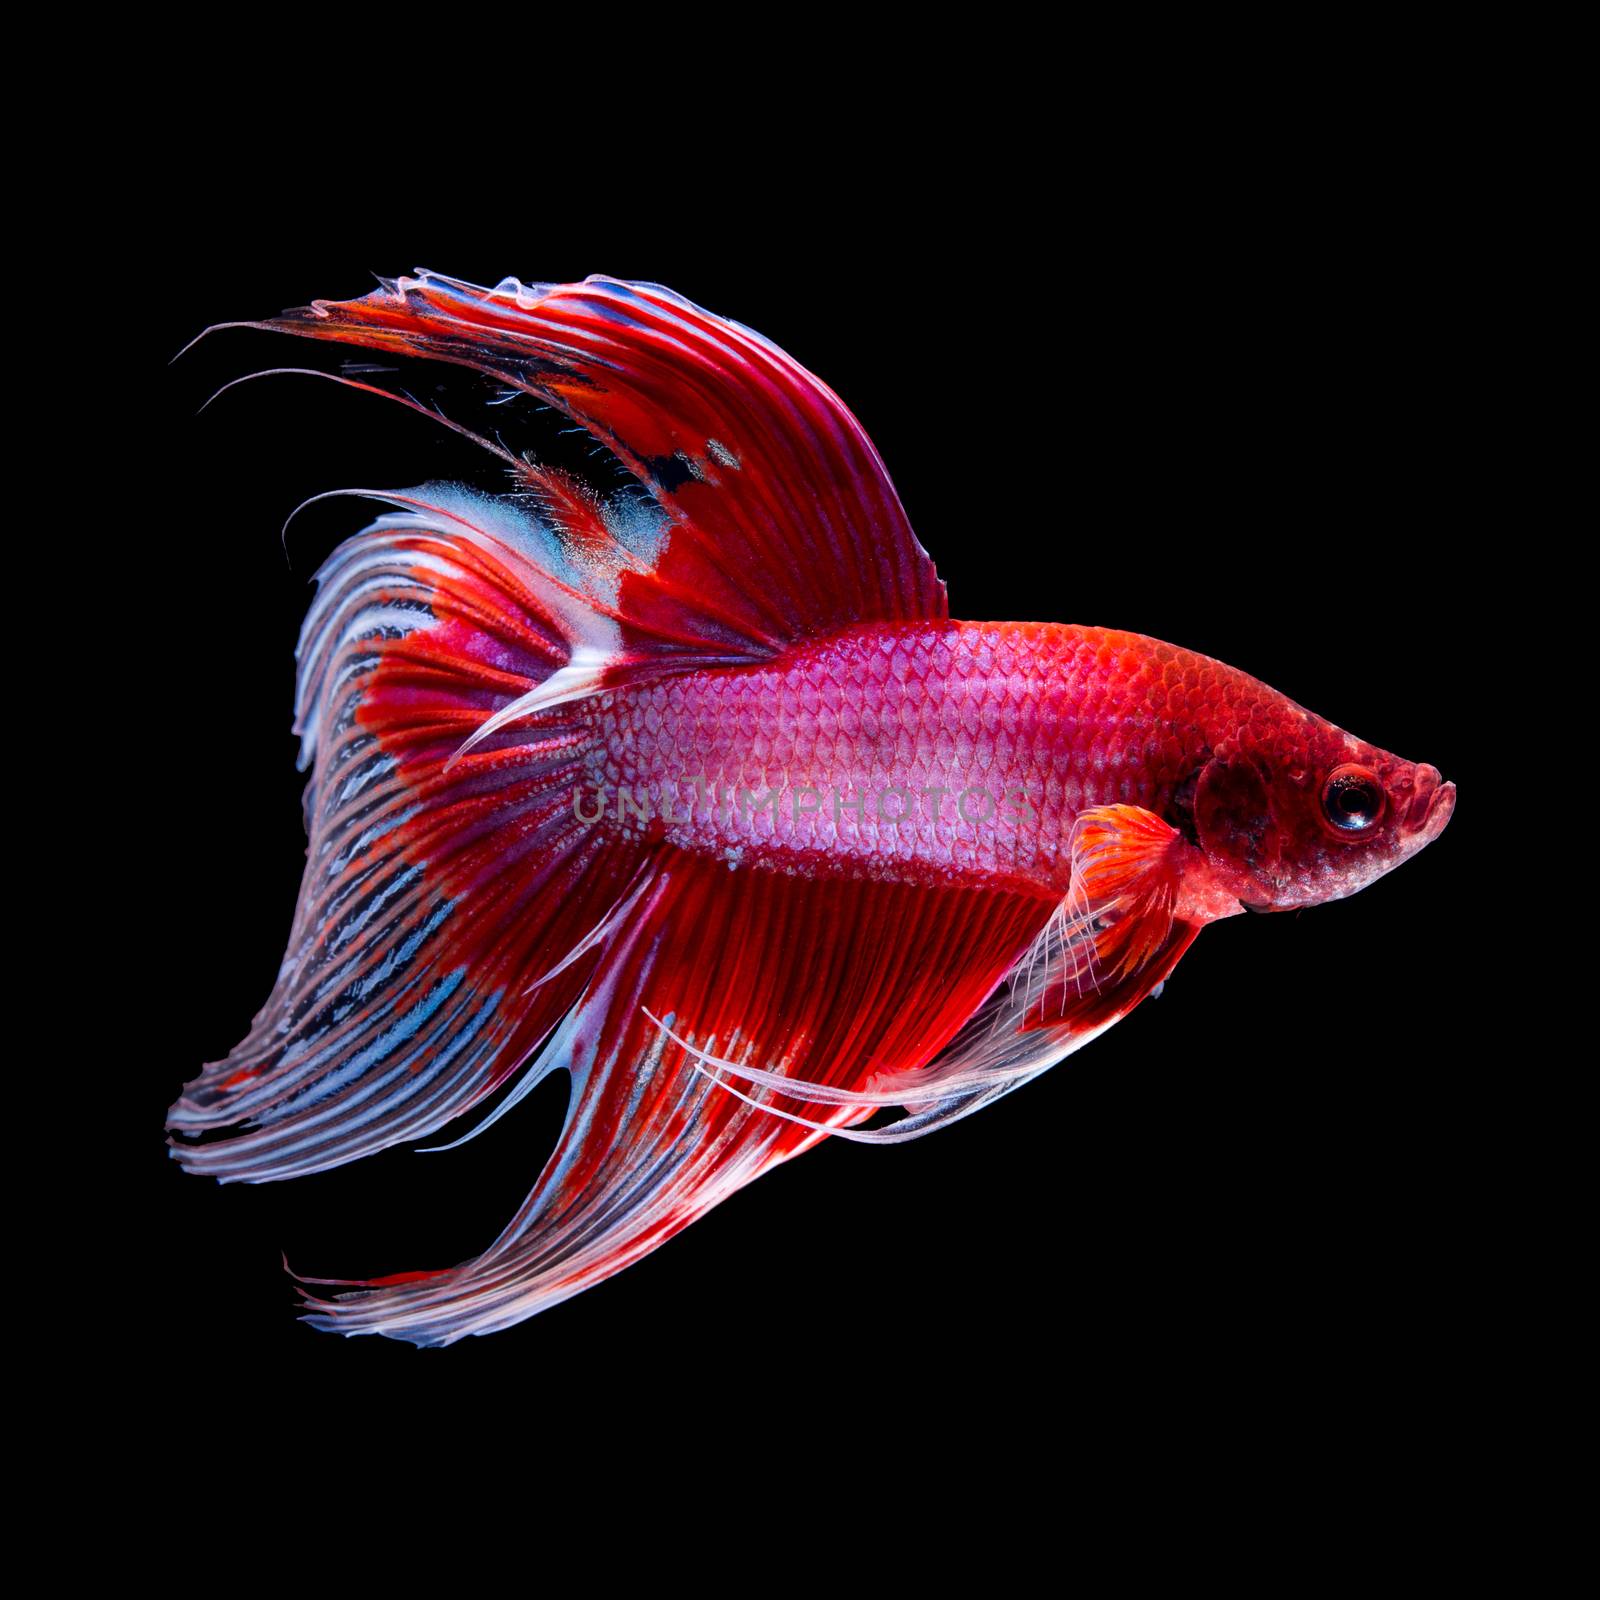 Red siamese fighting fish, betta fish, veil tail profile, on black background